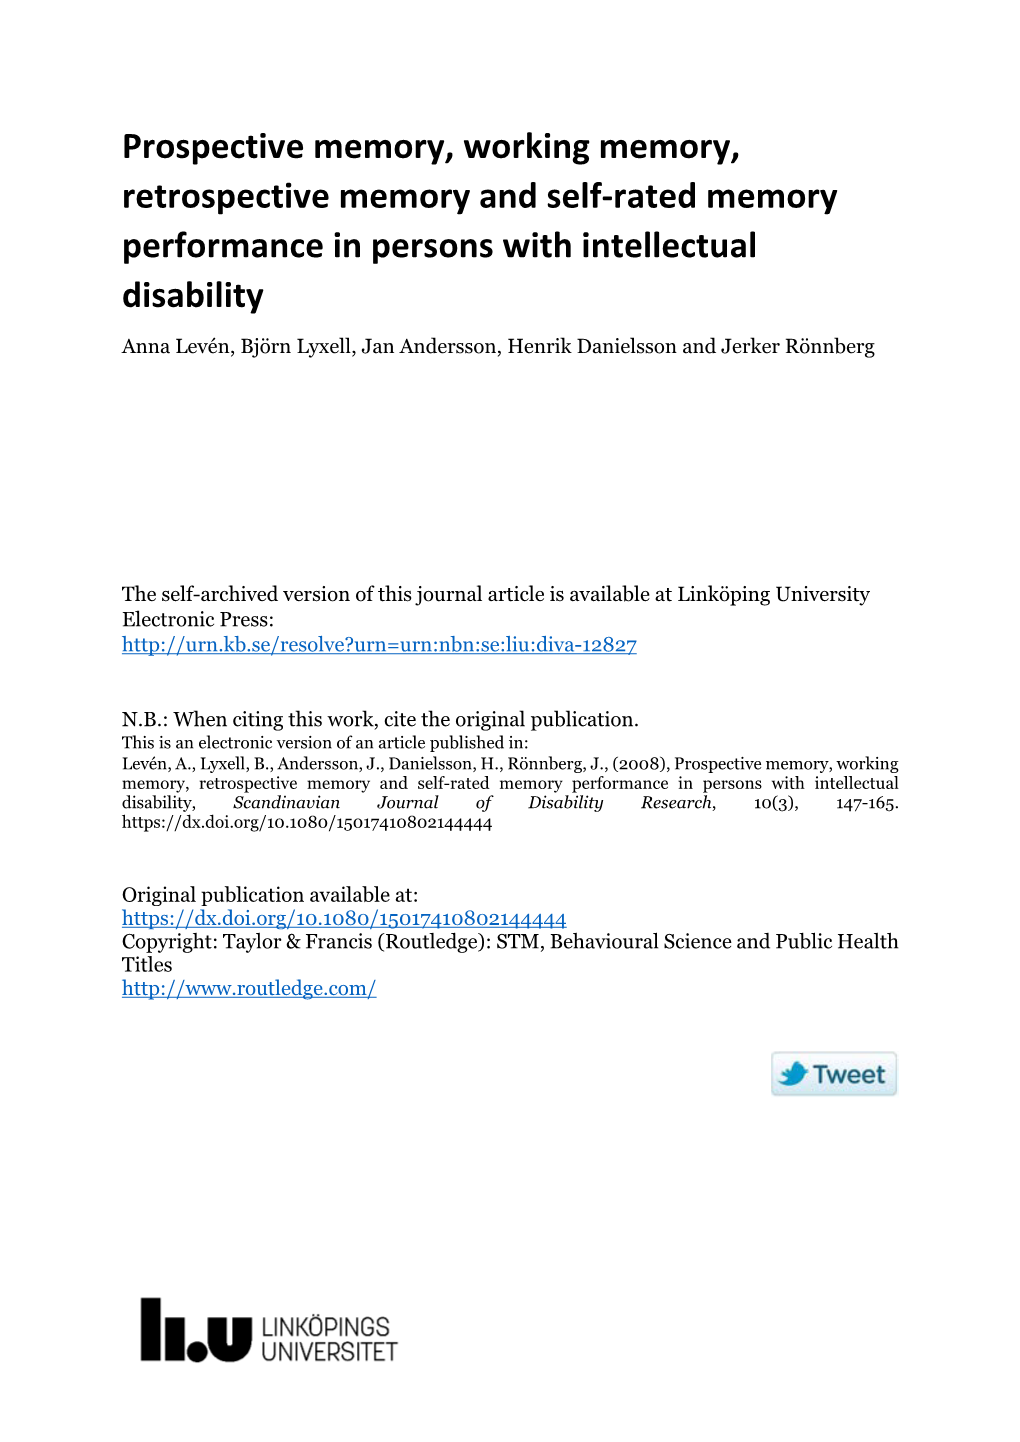 Prospective Memory, Working Memory, Retrospective Memory and Self-Rated Memory Performance in Persons with Intellectual Disabili